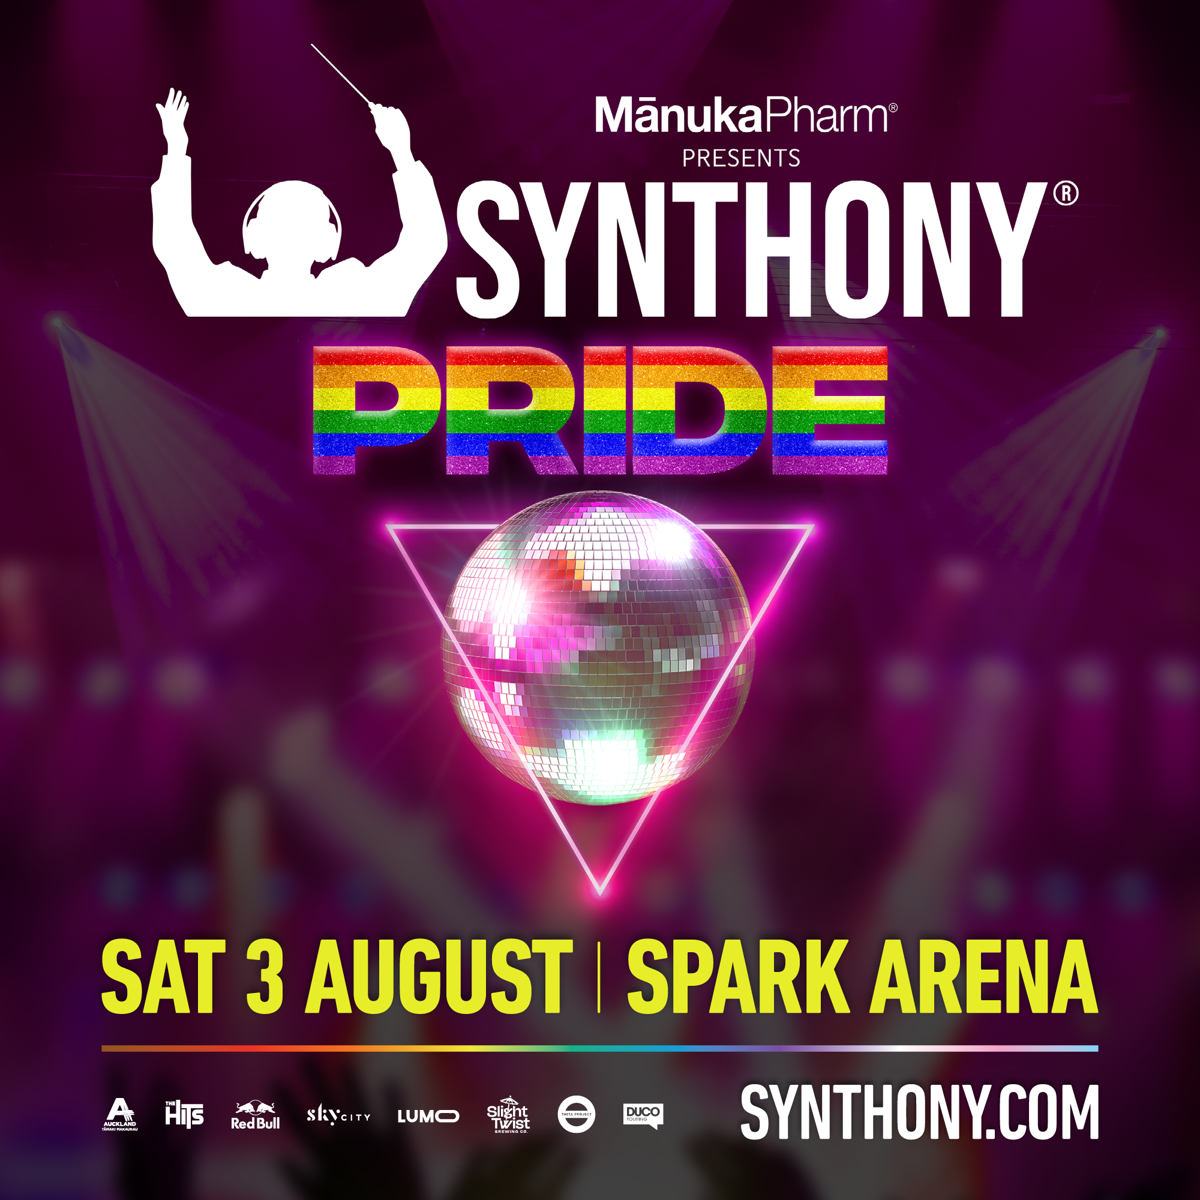 Synthony Pride SOCIAL SQUARE (1)